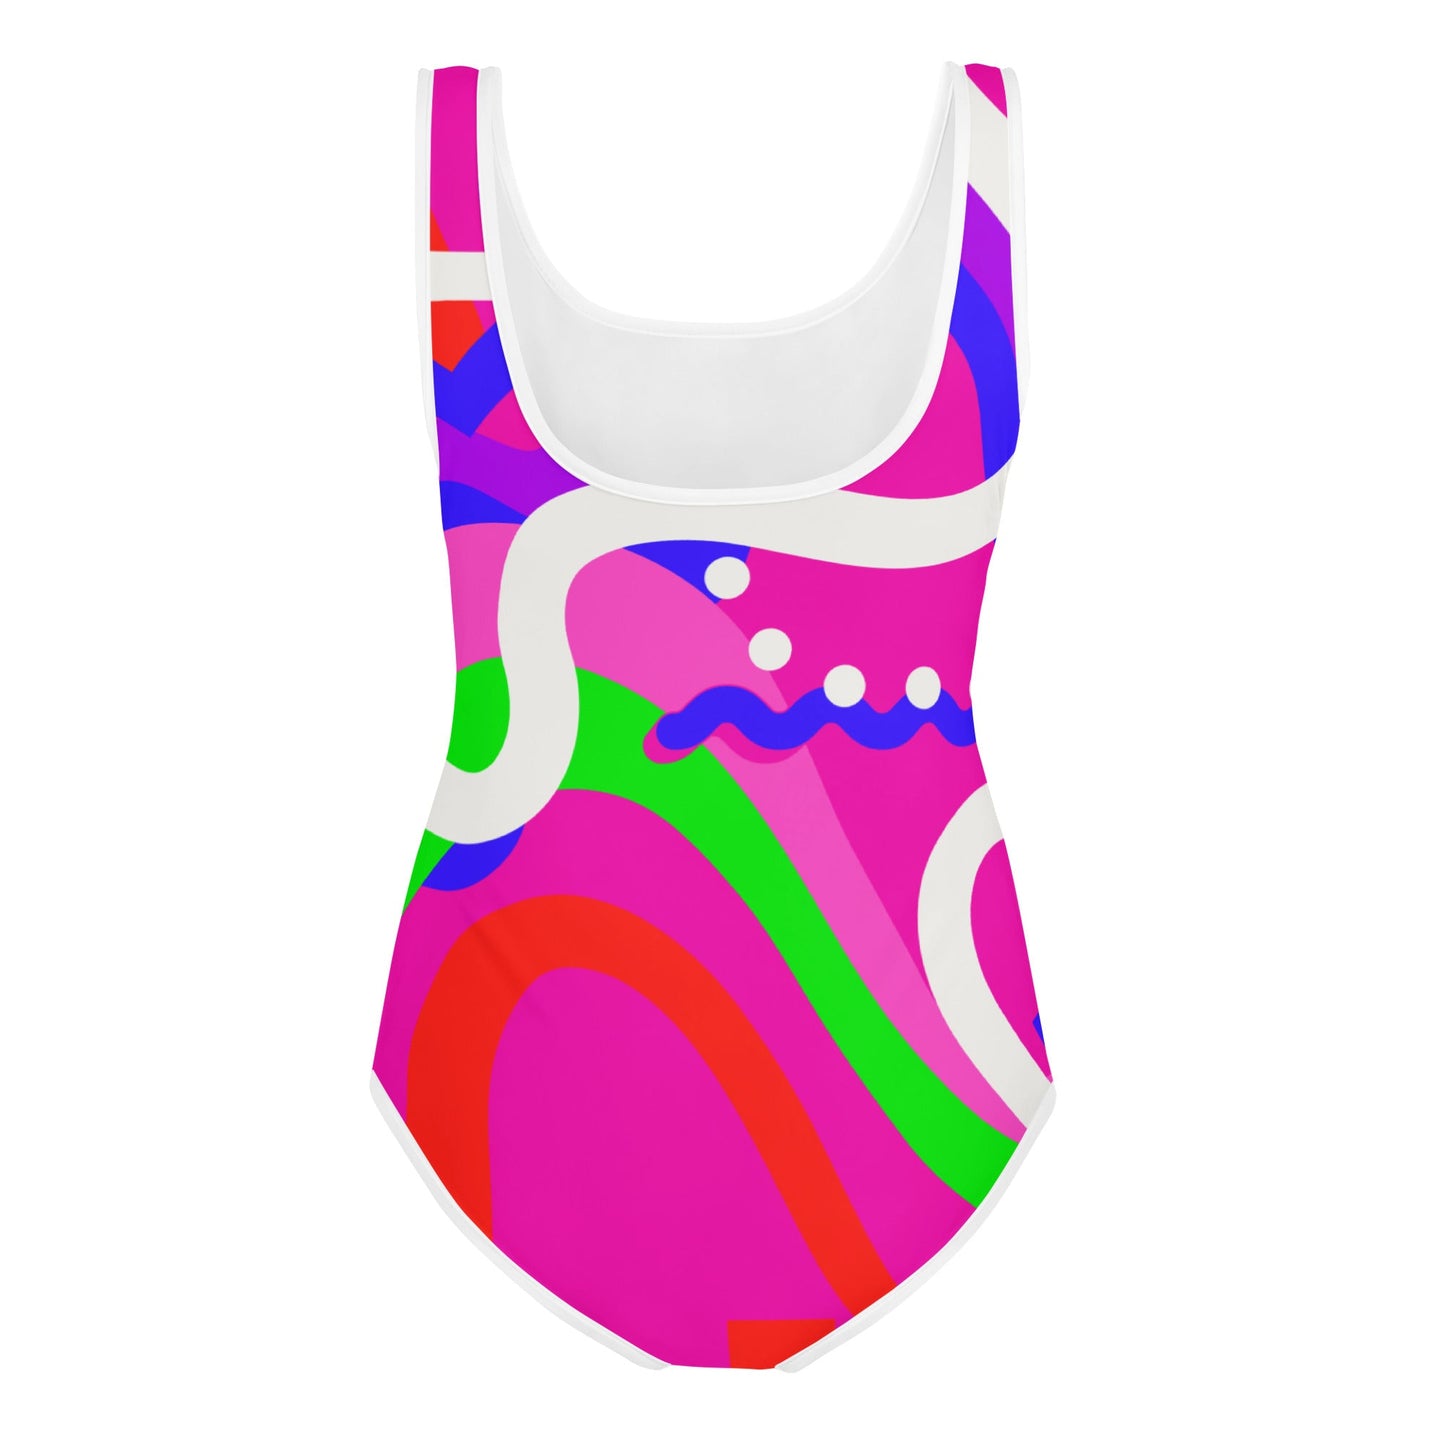 Plastic Doll Rollerblading Youth Swimsuit- Cosplay, Costume 80s costume80s stylebarbie doll#tag4##tag5##tag6#